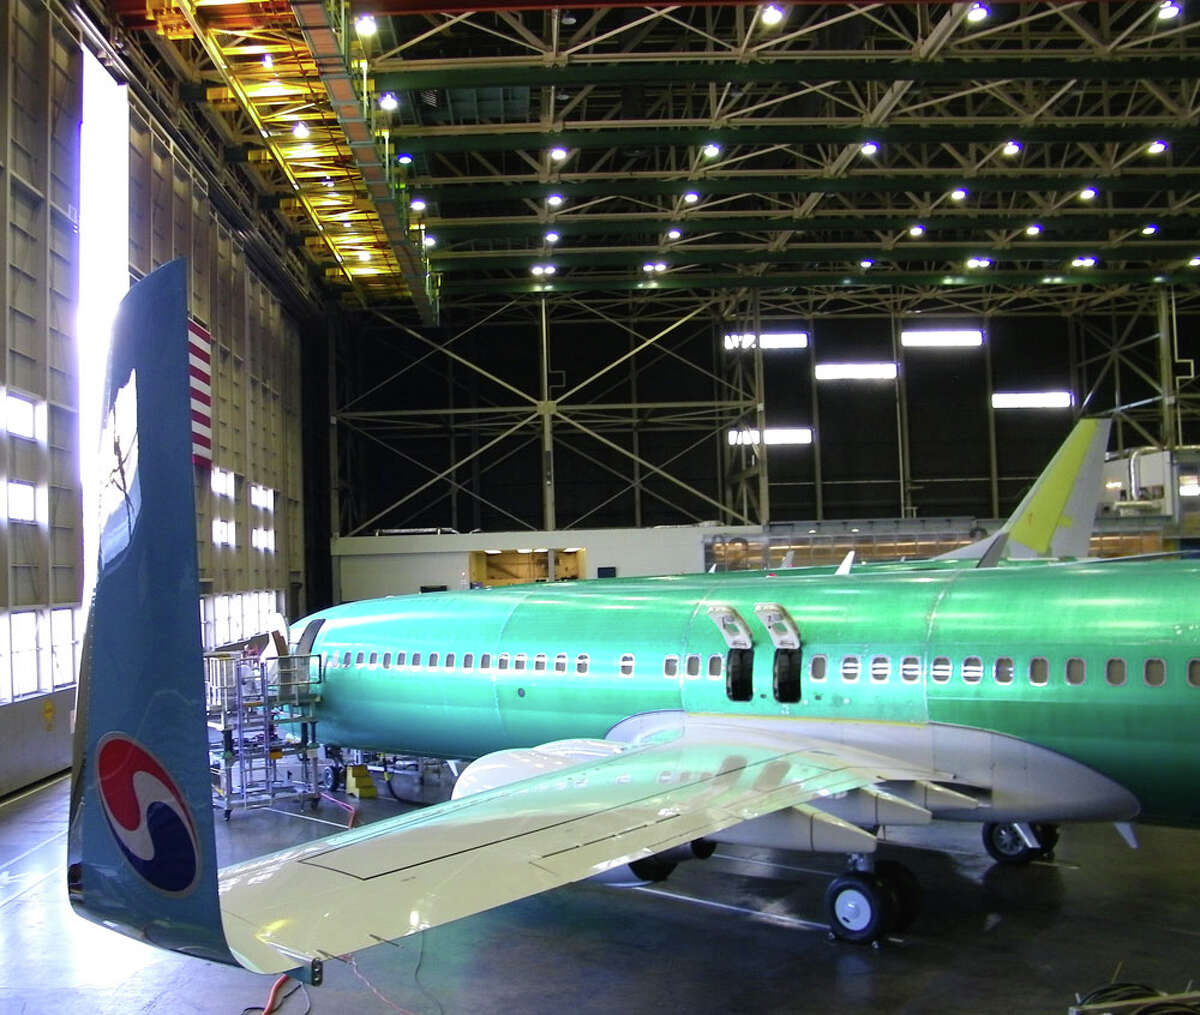 Boeing workers assemble a 737 for Korean Air on Friday, June 3, 2011 in Boeing's 737 plant in Renton, Wash.